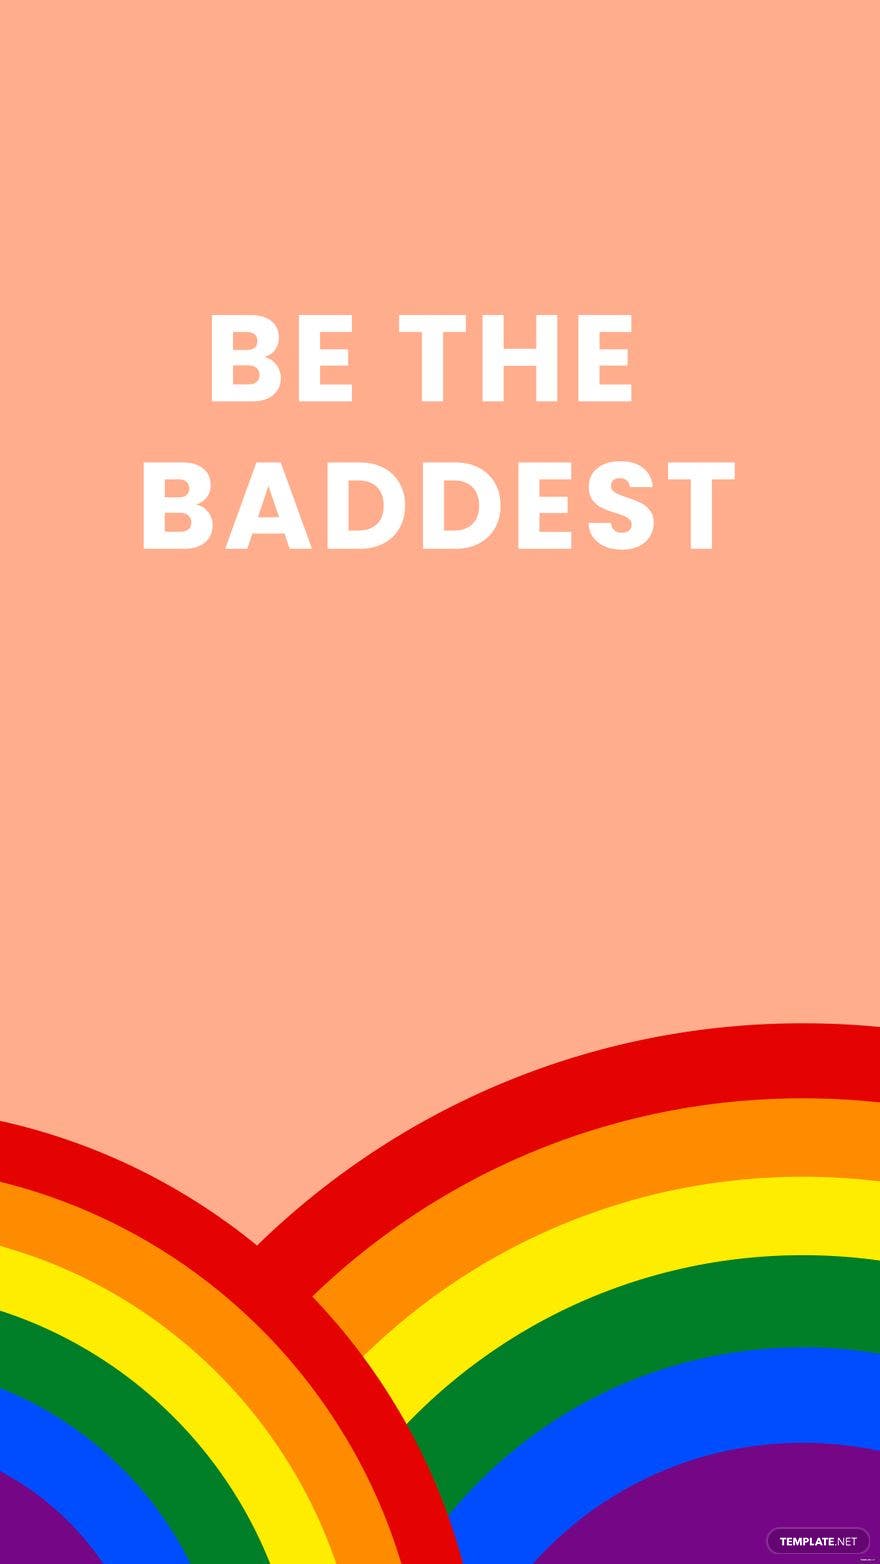 A phone background with a rainbow and the words 